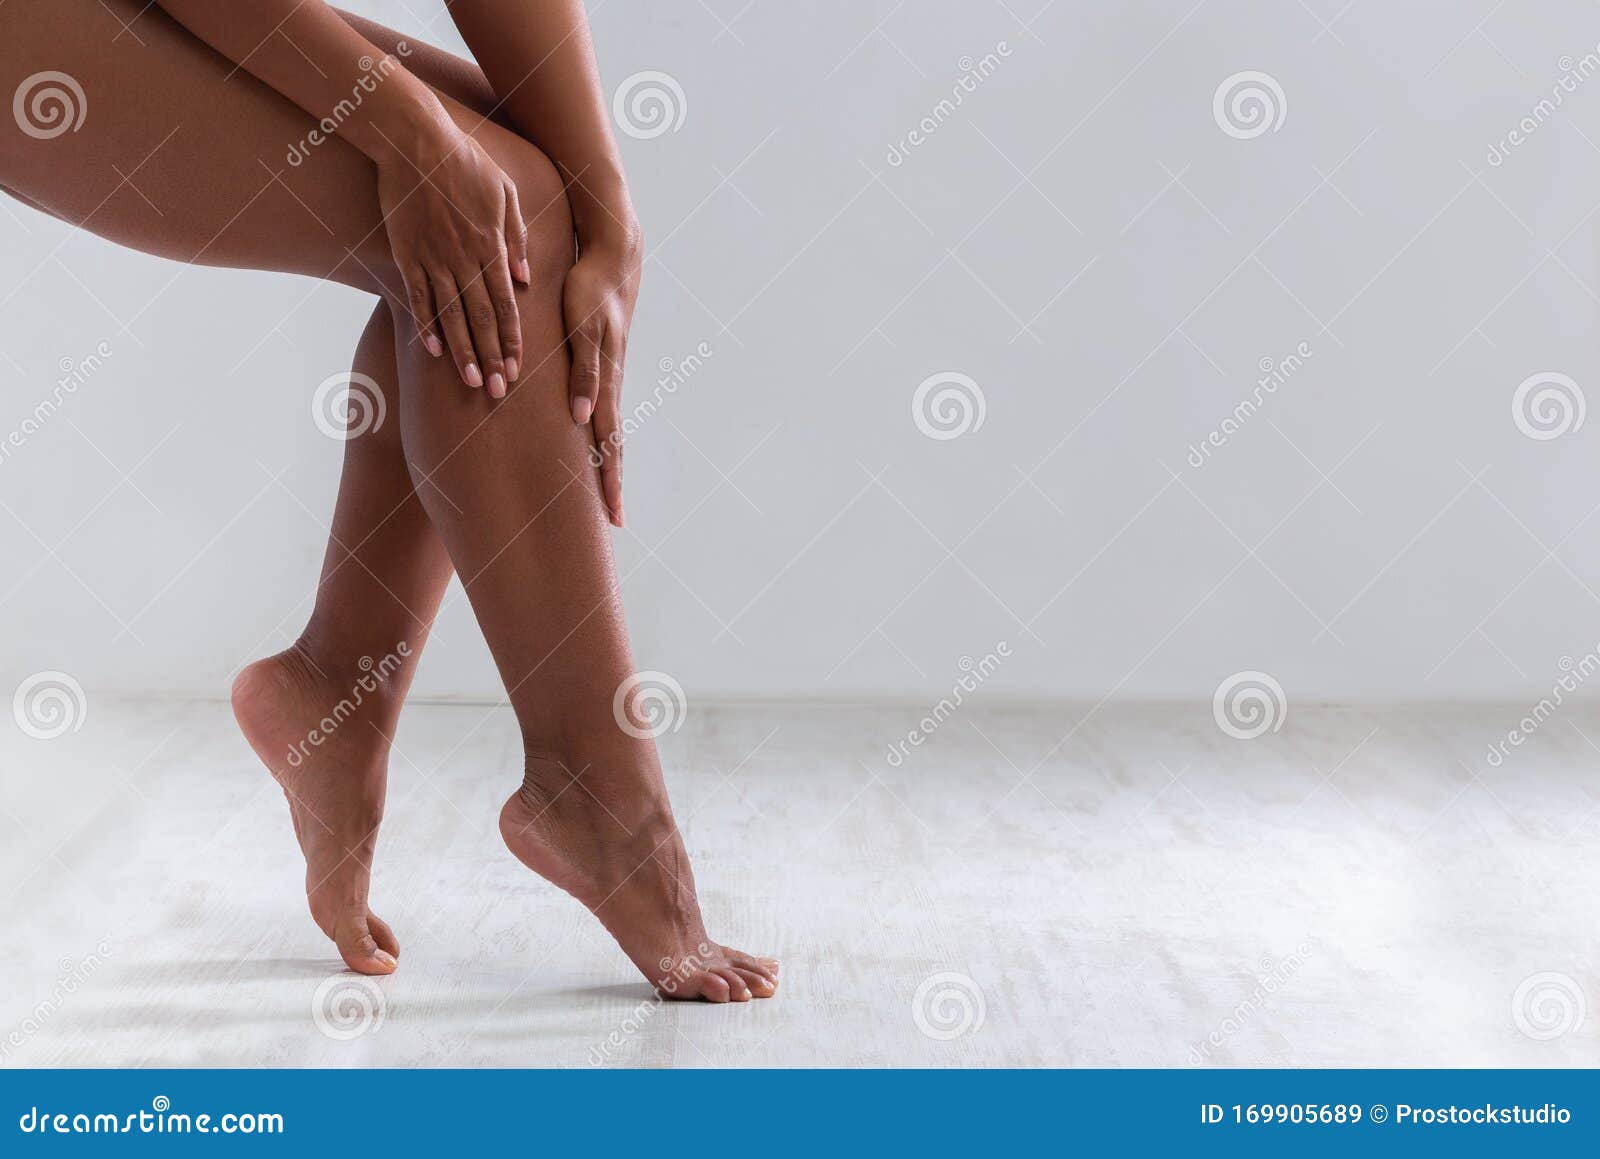 cropped of female legs, woman touching her skin after waxing